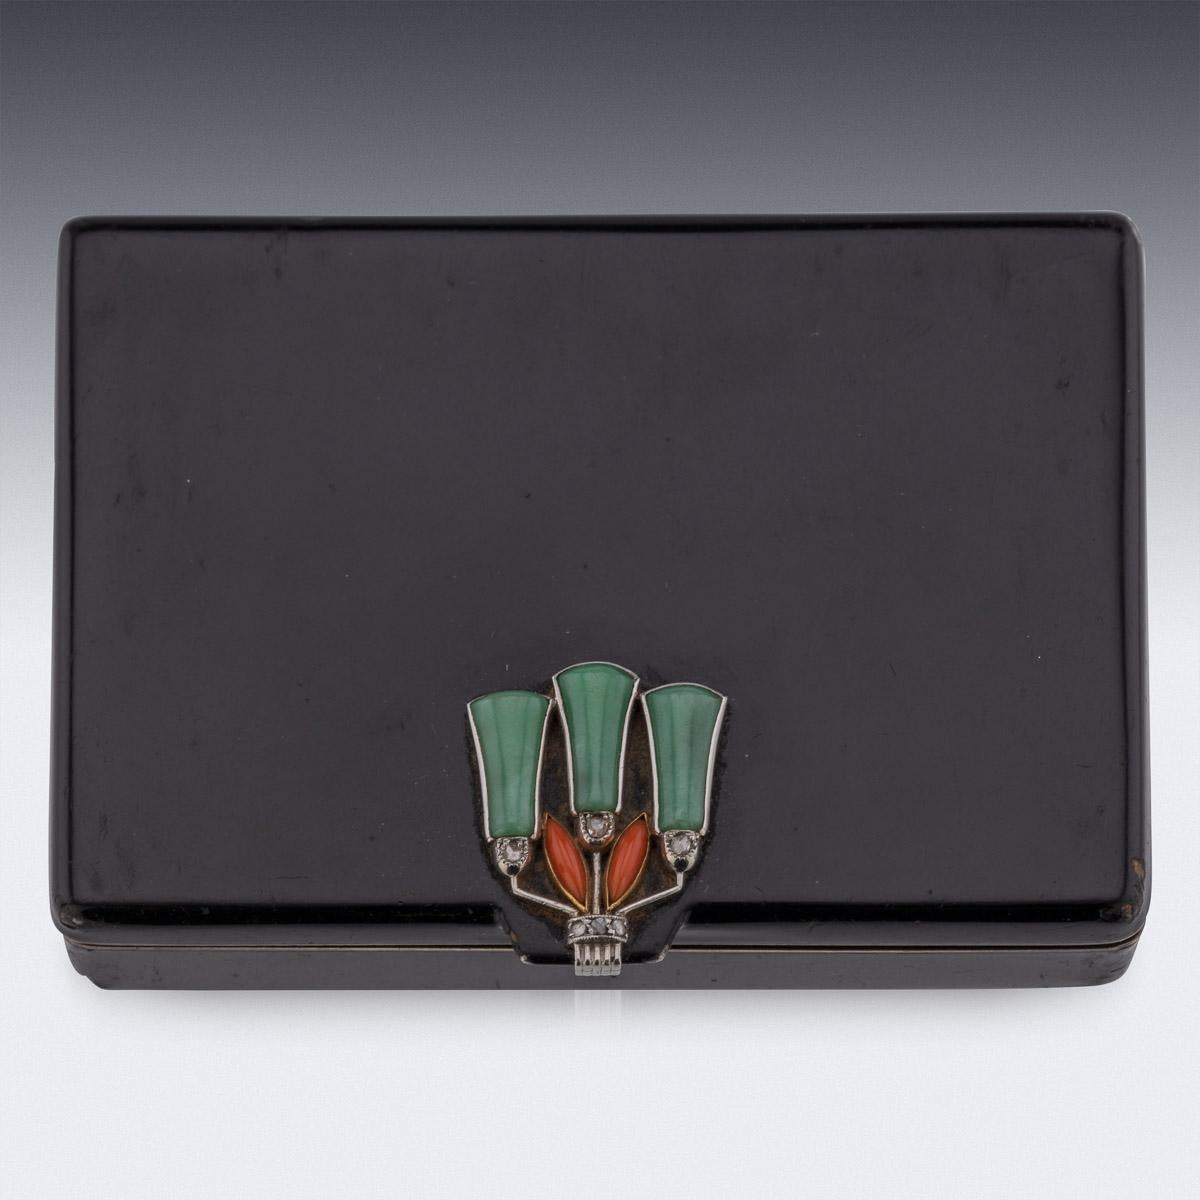 20th Century French Cartier Art Deco gold vanity case, of rectangular form with rounded corners, the lid set with a flower shaped thumb-piece, with jade and corals, mounted on platinum set with 6 old cut diamonds, the whole box is applied with black